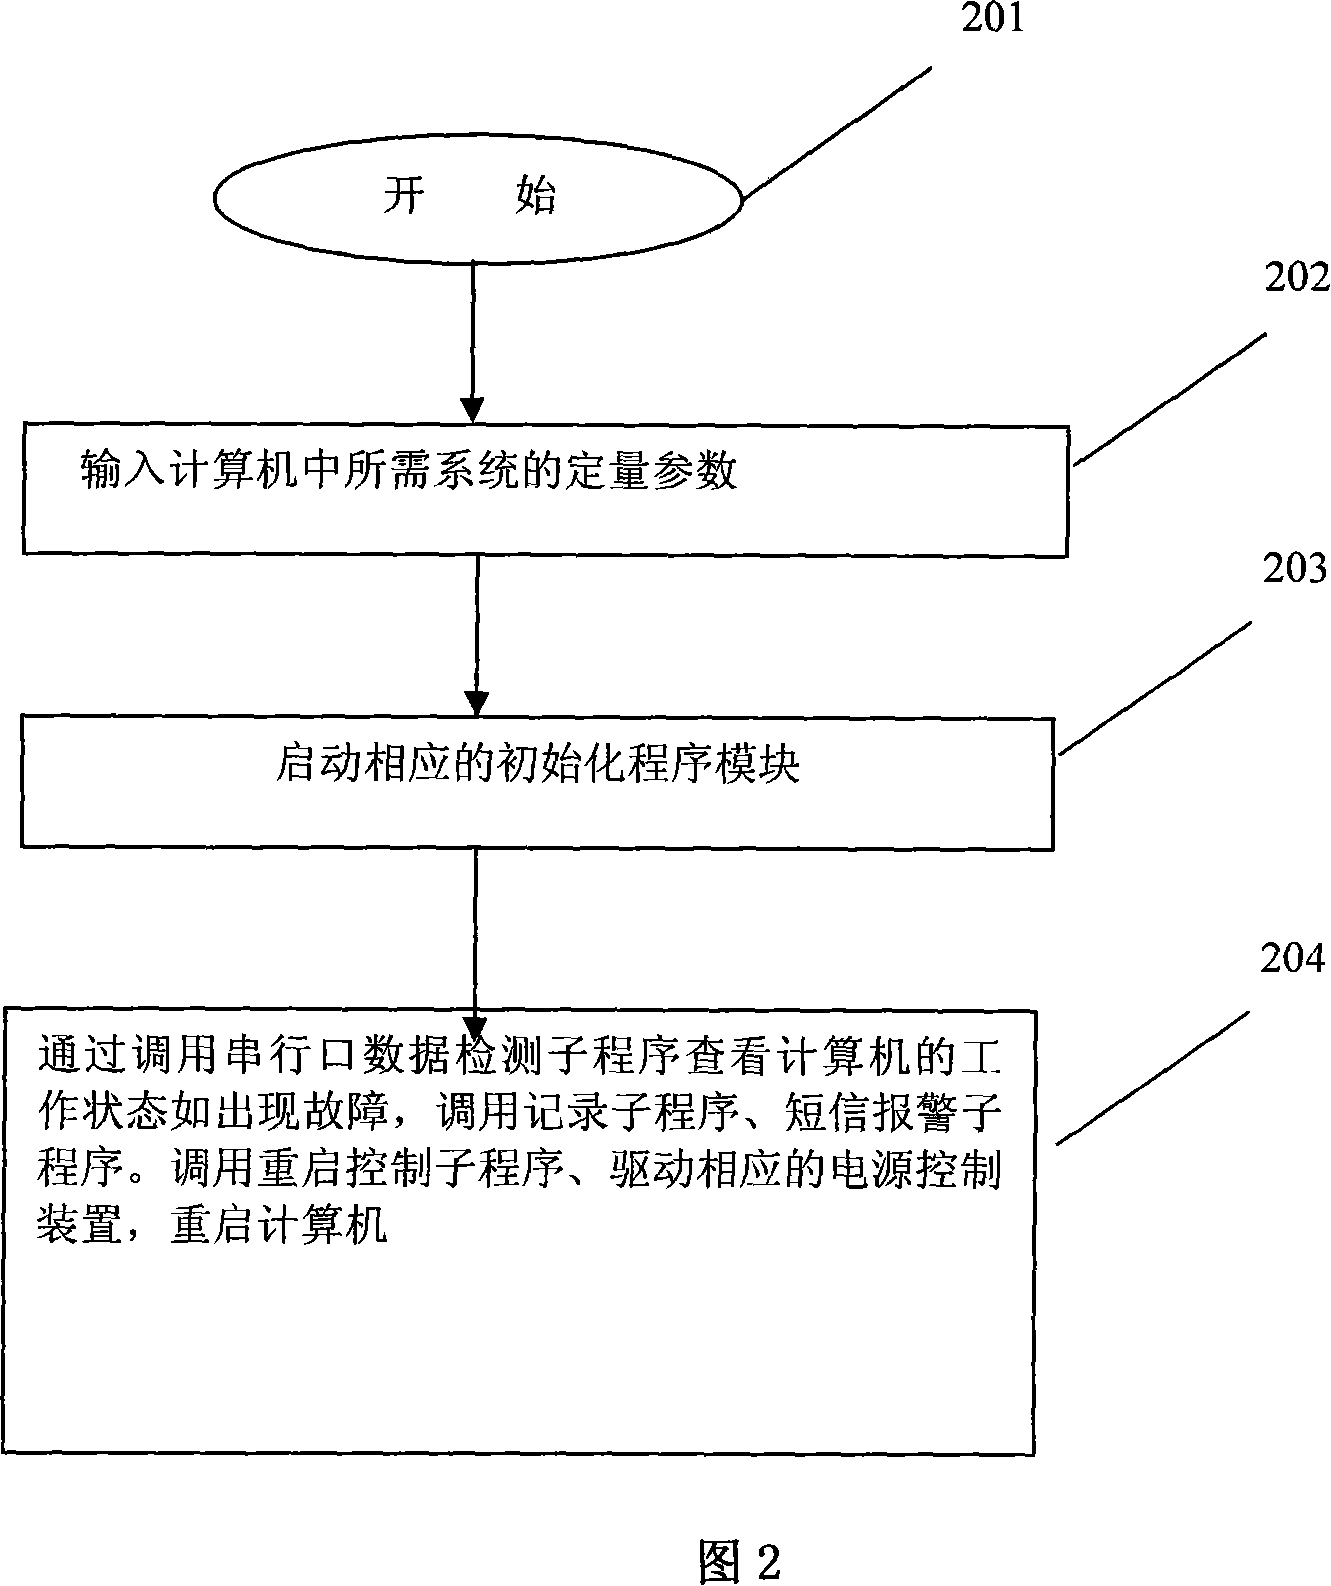 Method for implementing control of computer fault alarm